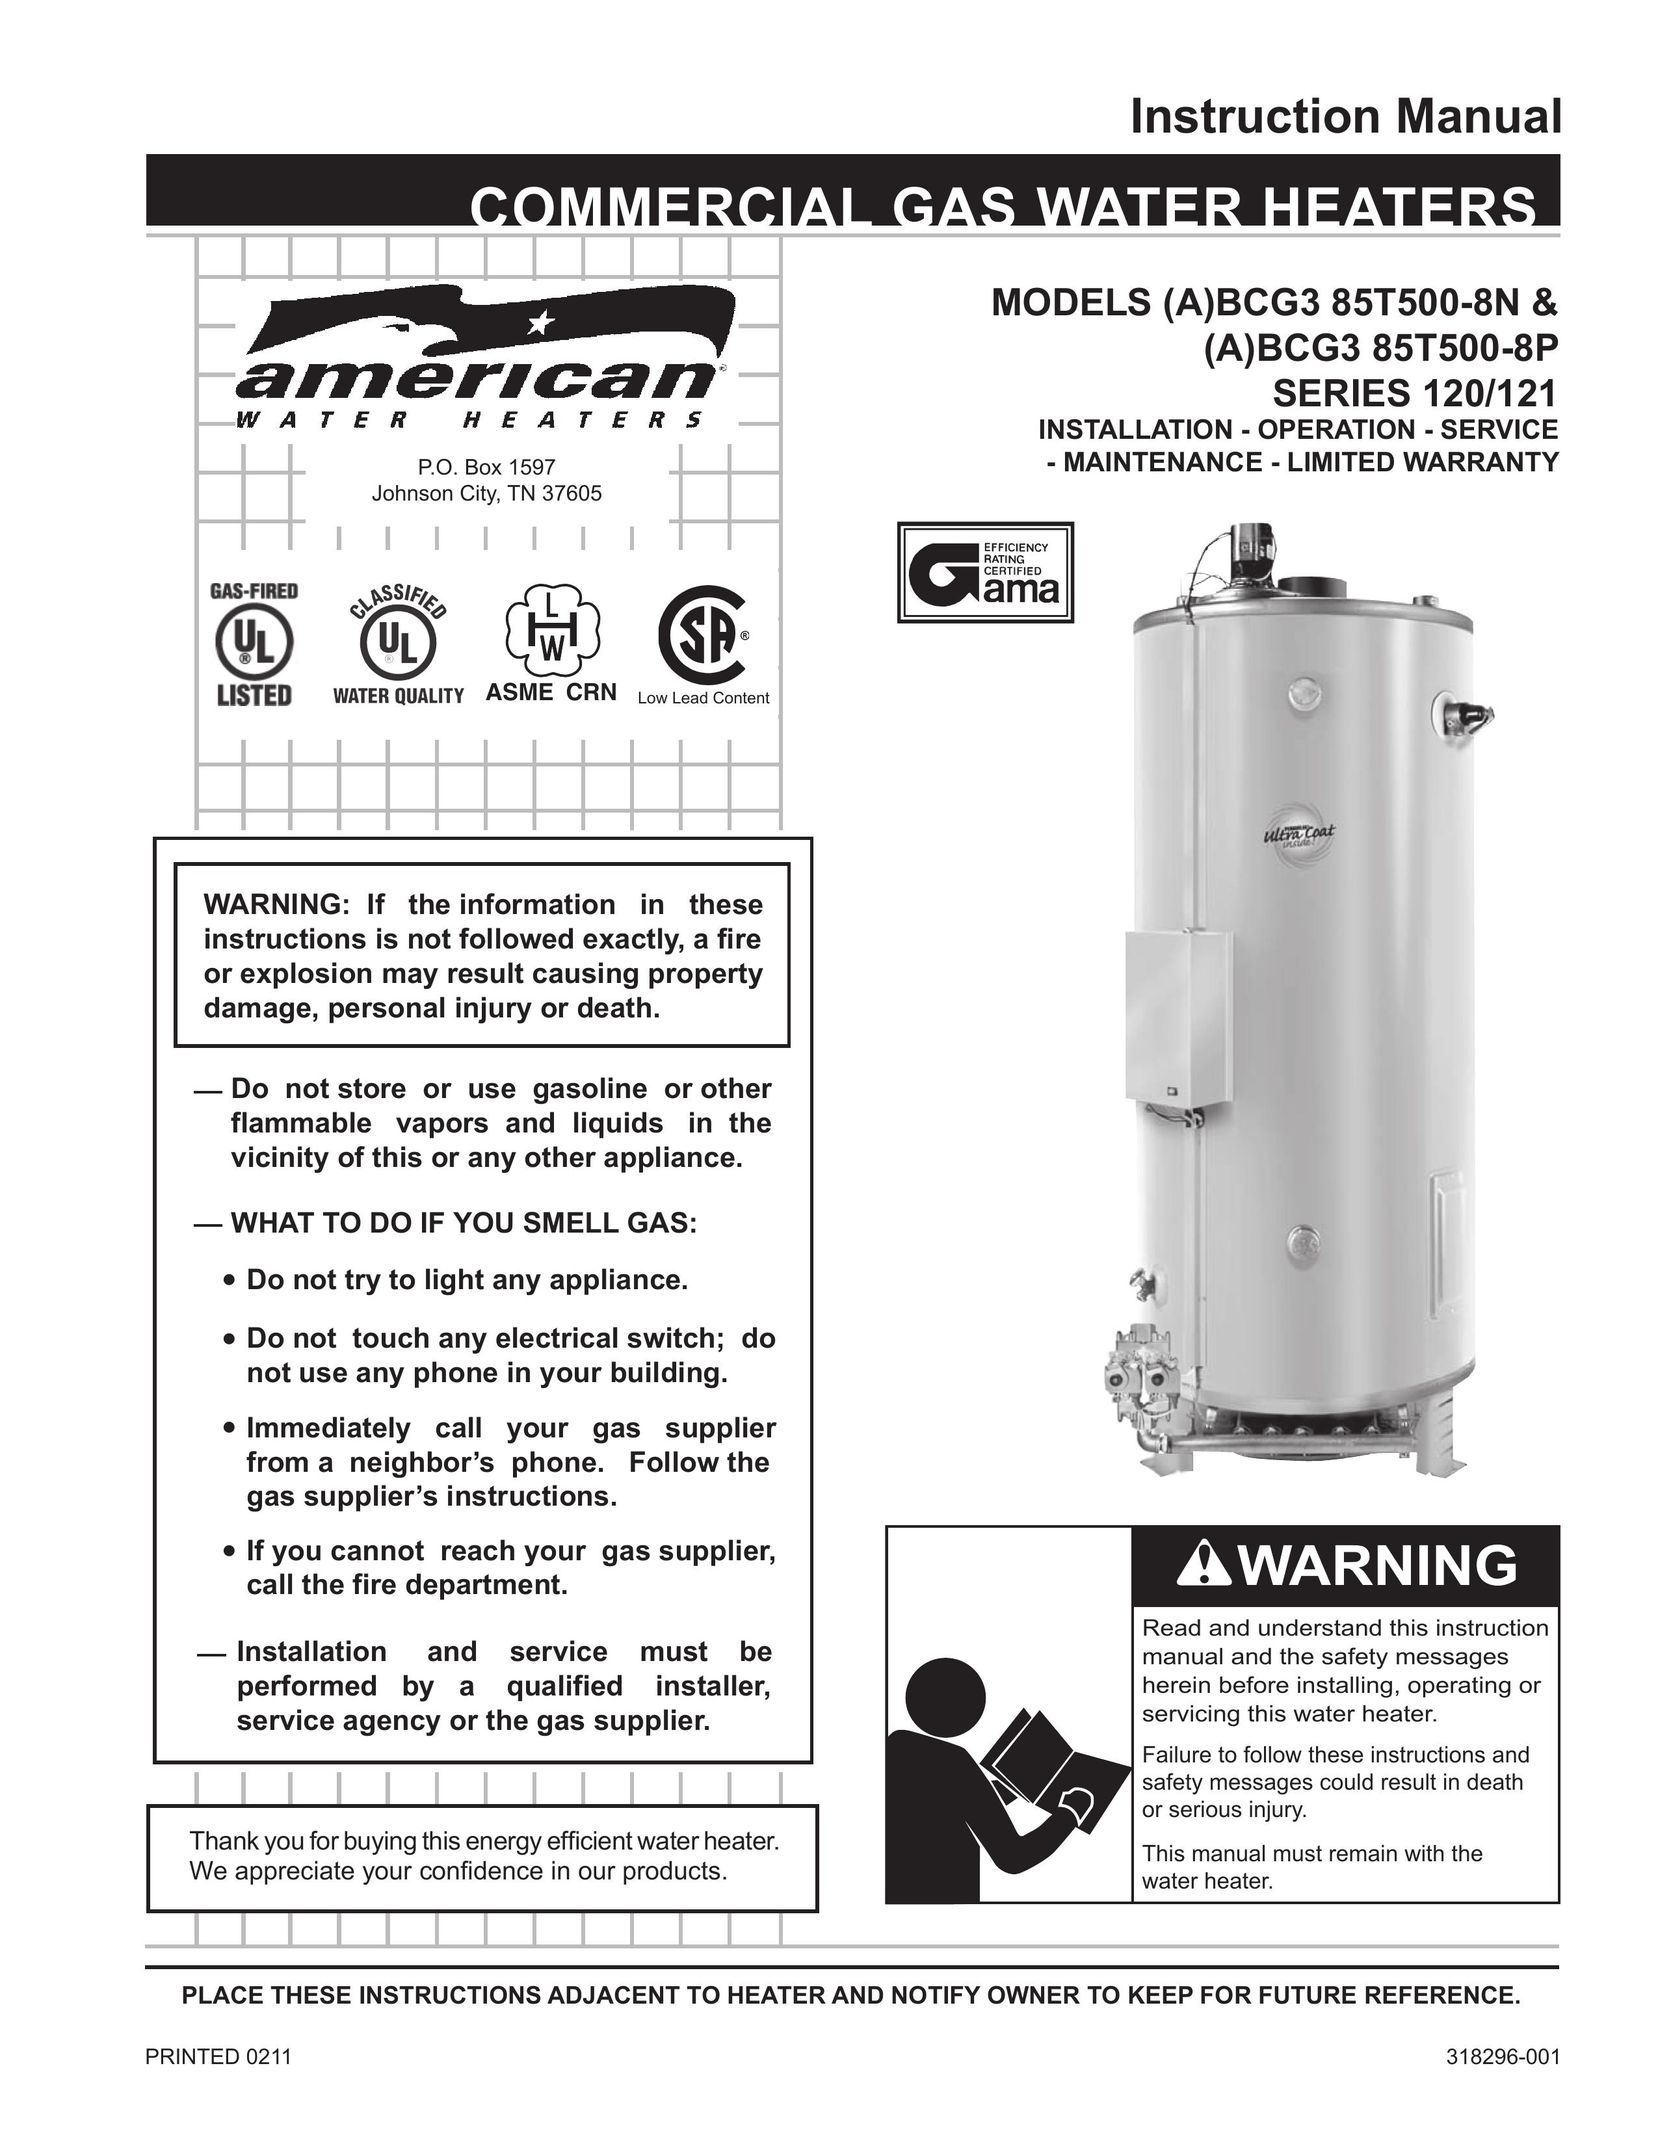 American Water Heater (A)BCG3 85T500-8N Water Heater User Manual